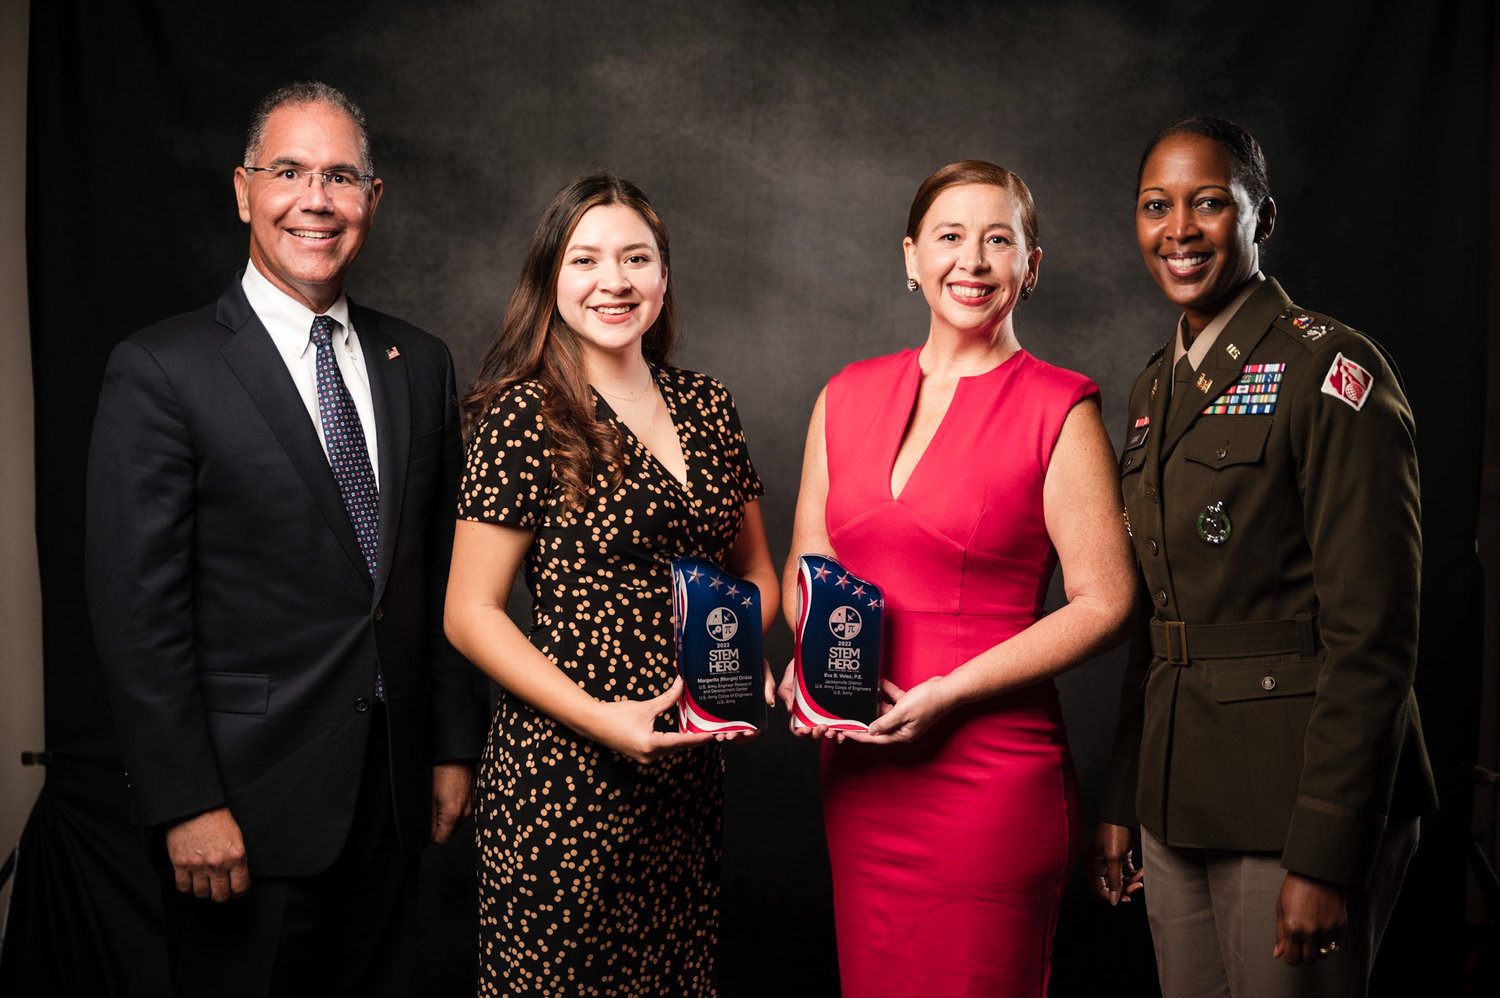 (Left to right) Jose Sanchez, SES, Margarita (Margie) Ordaz, Research Civil Engineer, U.S. Army Engineers Research and Development Center, U.S. Army Corps of Engineers U.S. Army, Eva B. Vélez, Chief Ecosystem Branch/Program Manager, U.S. Army Corps of Engineers, Jacksonville District (red dress) and U.S. Army Col. (P) Antoinette Gant, South Pacific Division commander. (GMIS photo)